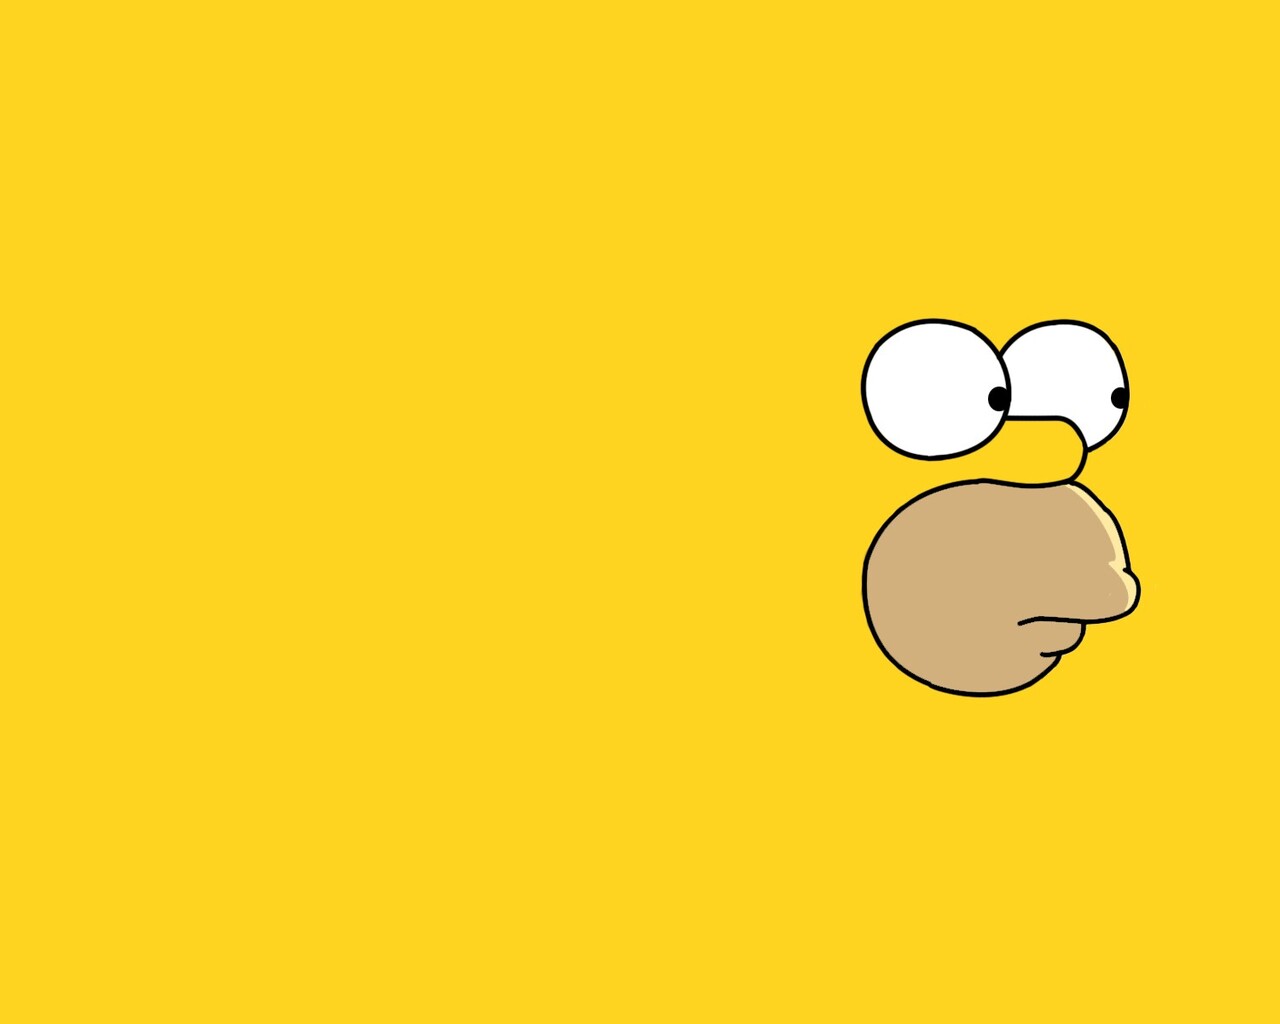 Homer Simpson wallpaper - yellow background with Homer's face on the right side - The Simpsons